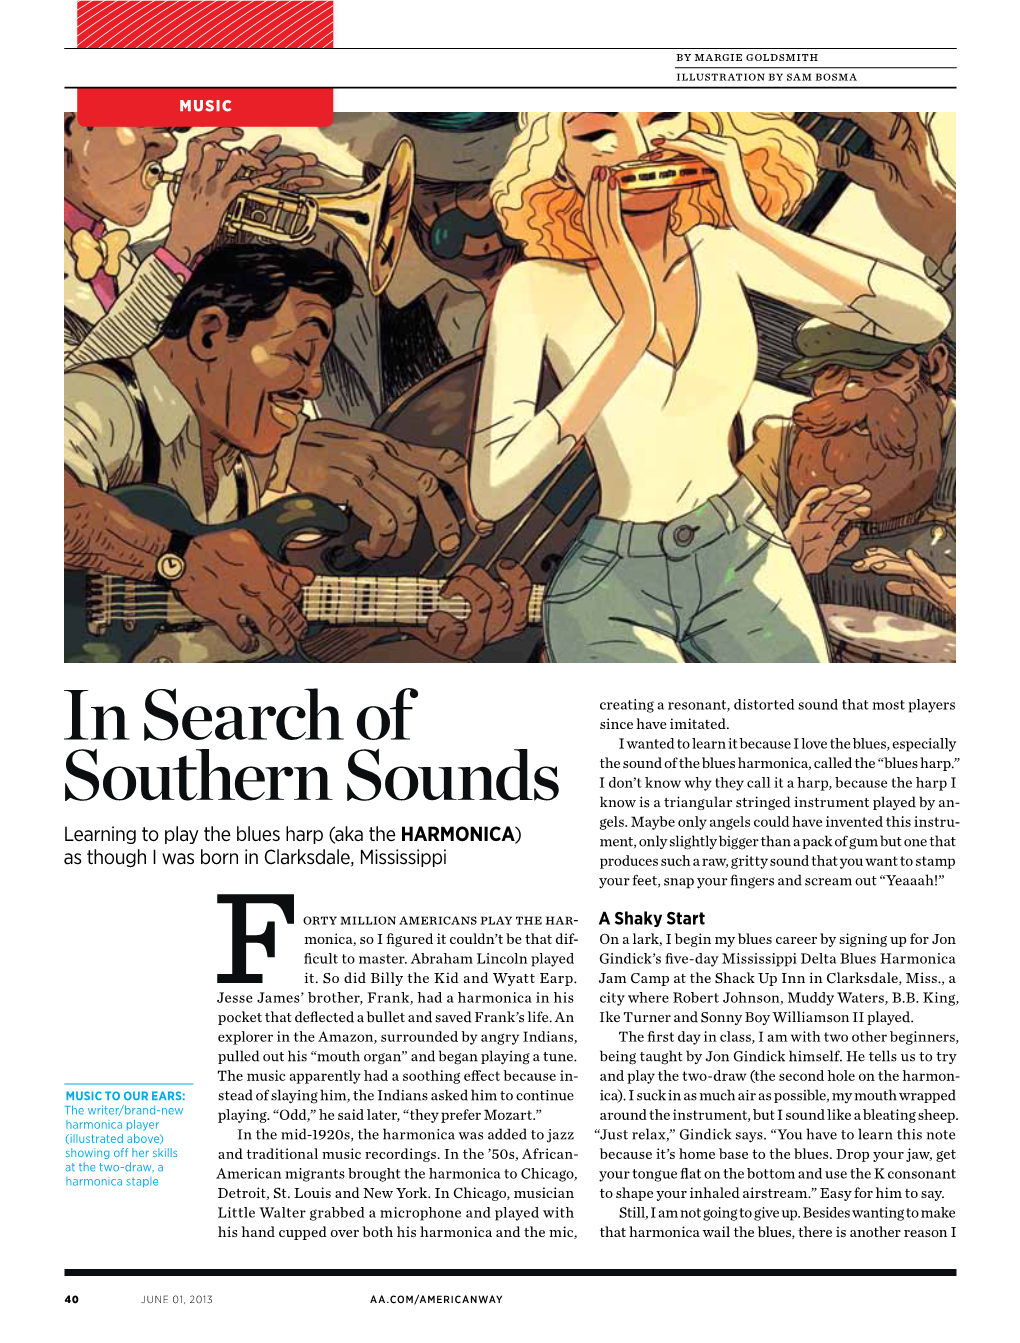 In Search of Southern Sounds